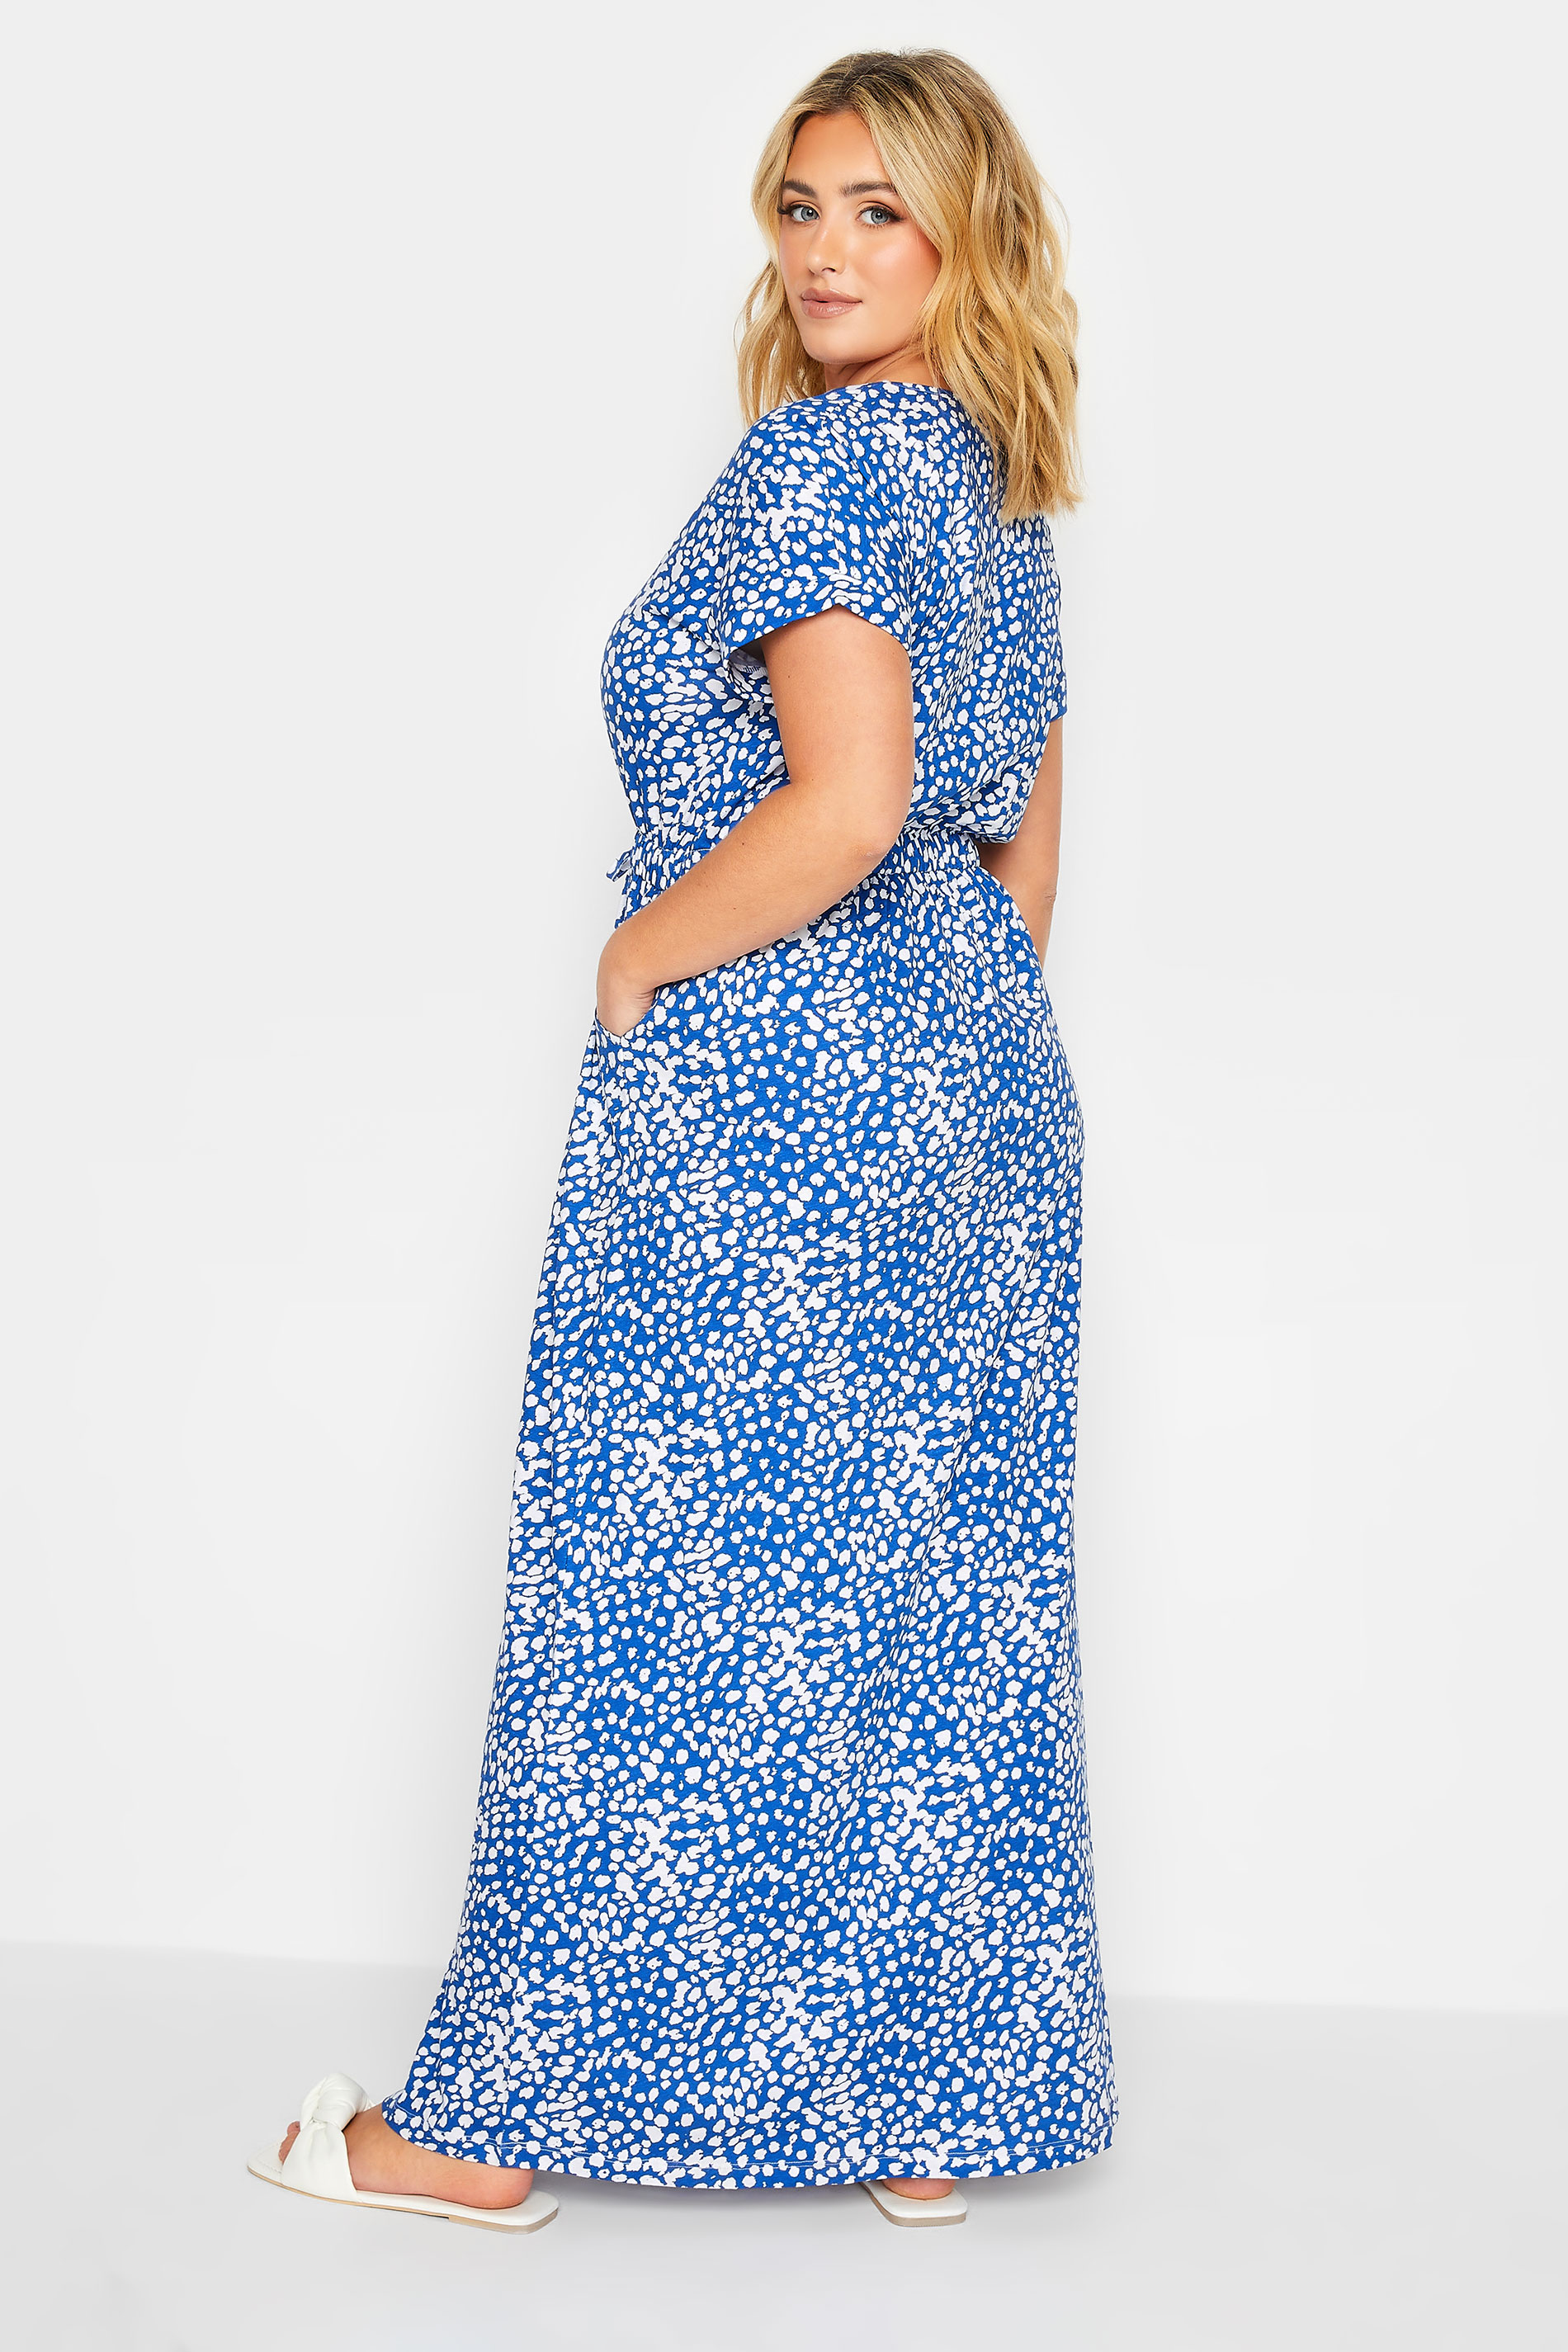 YOURS Plus Size Cobalt Blue Animal Print Maxi T-Shirt Dress | Yours Clothing 3